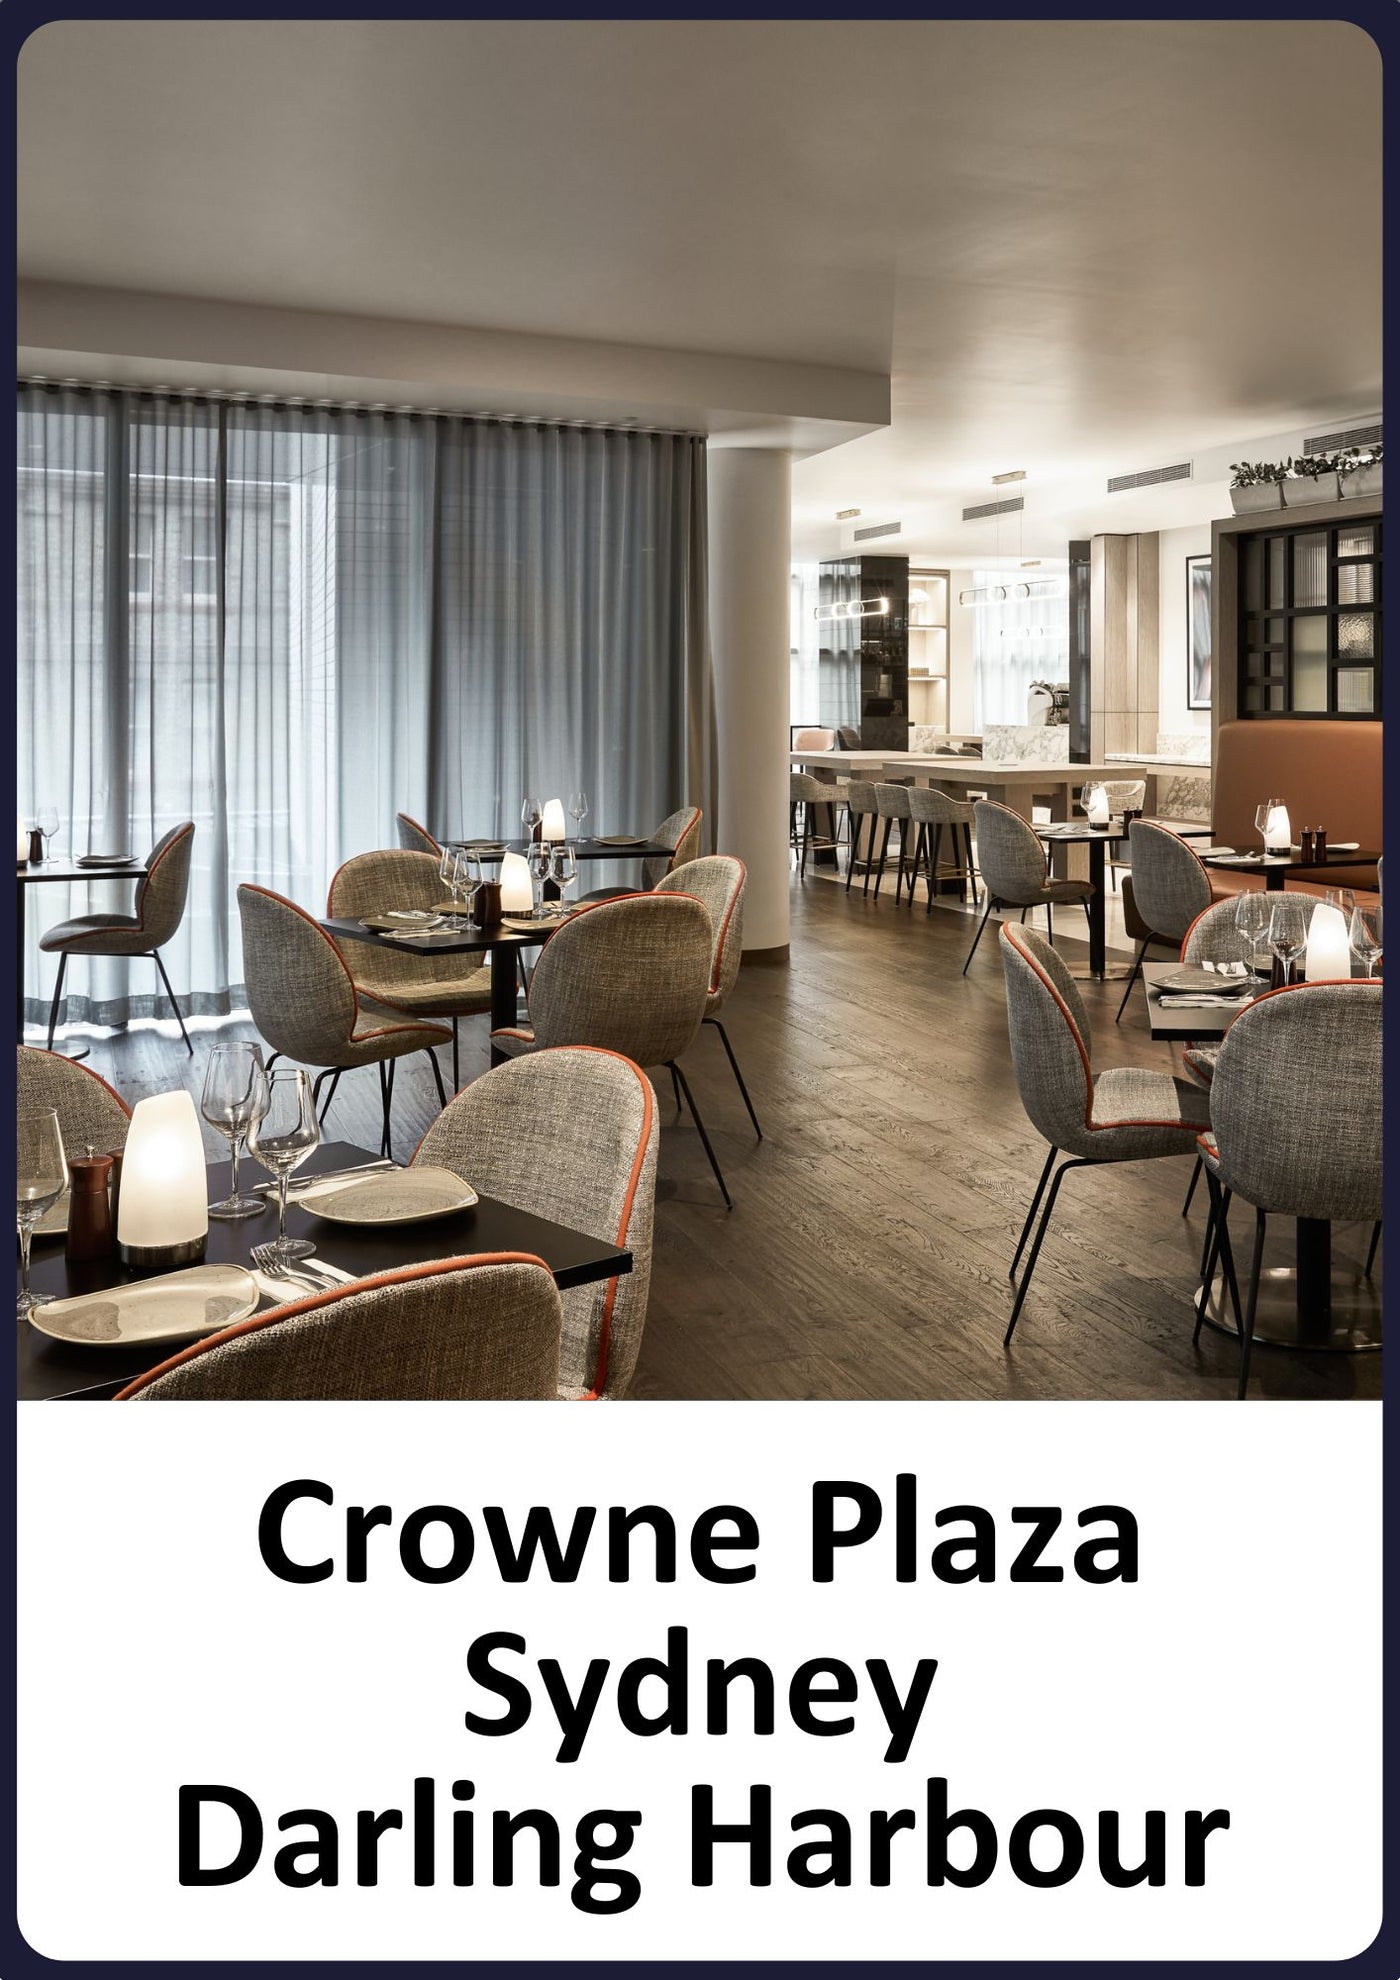 Mosaic Class&Gourmet Offerings at Crowne Plaza Sydney Darling Harbour